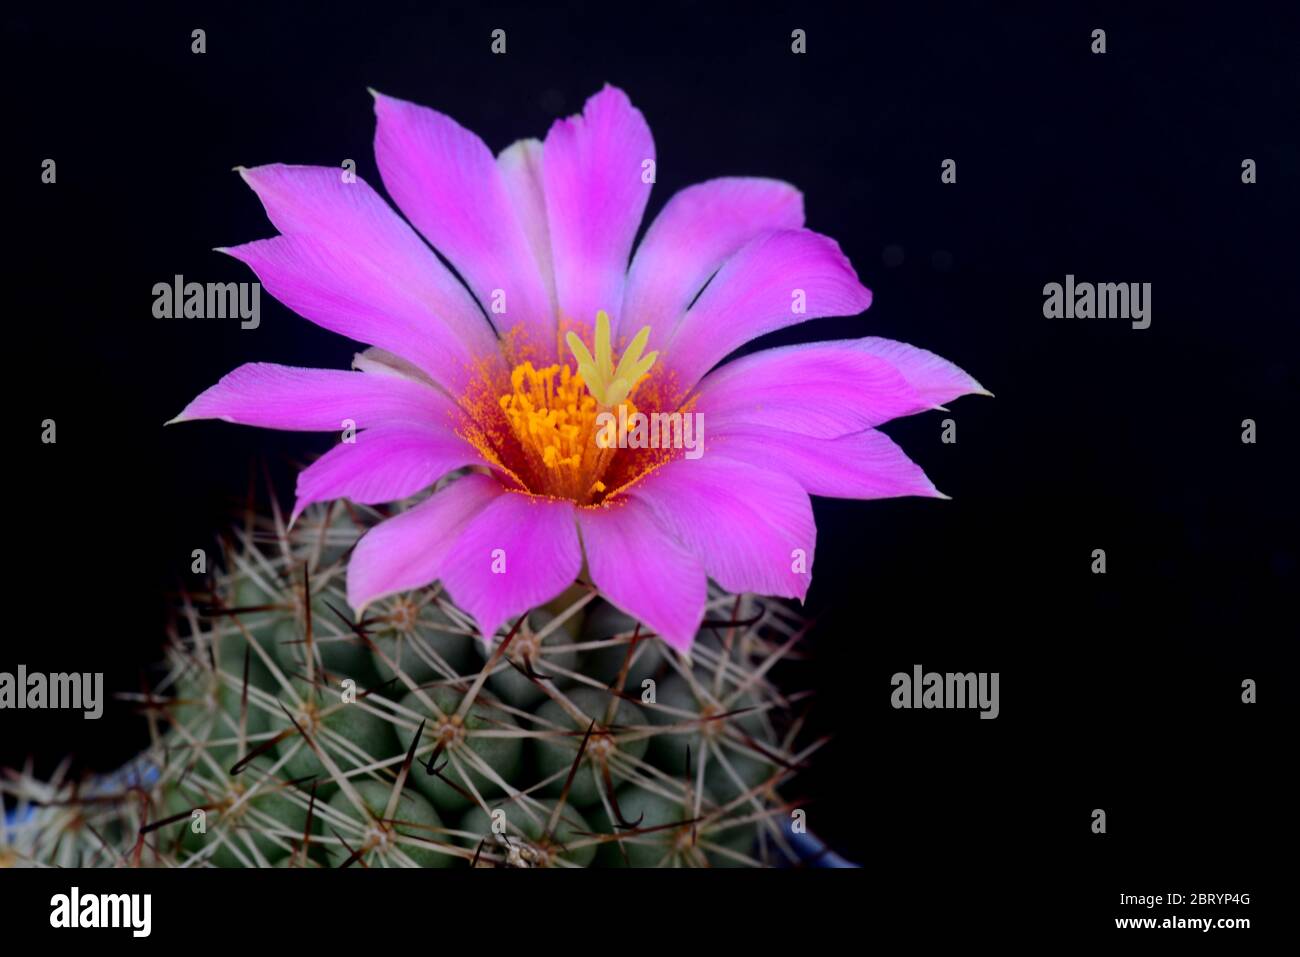 Blooming pink  flower of Mammillaria schumannii  cactus on  black  background with copy space for text Stock Photo